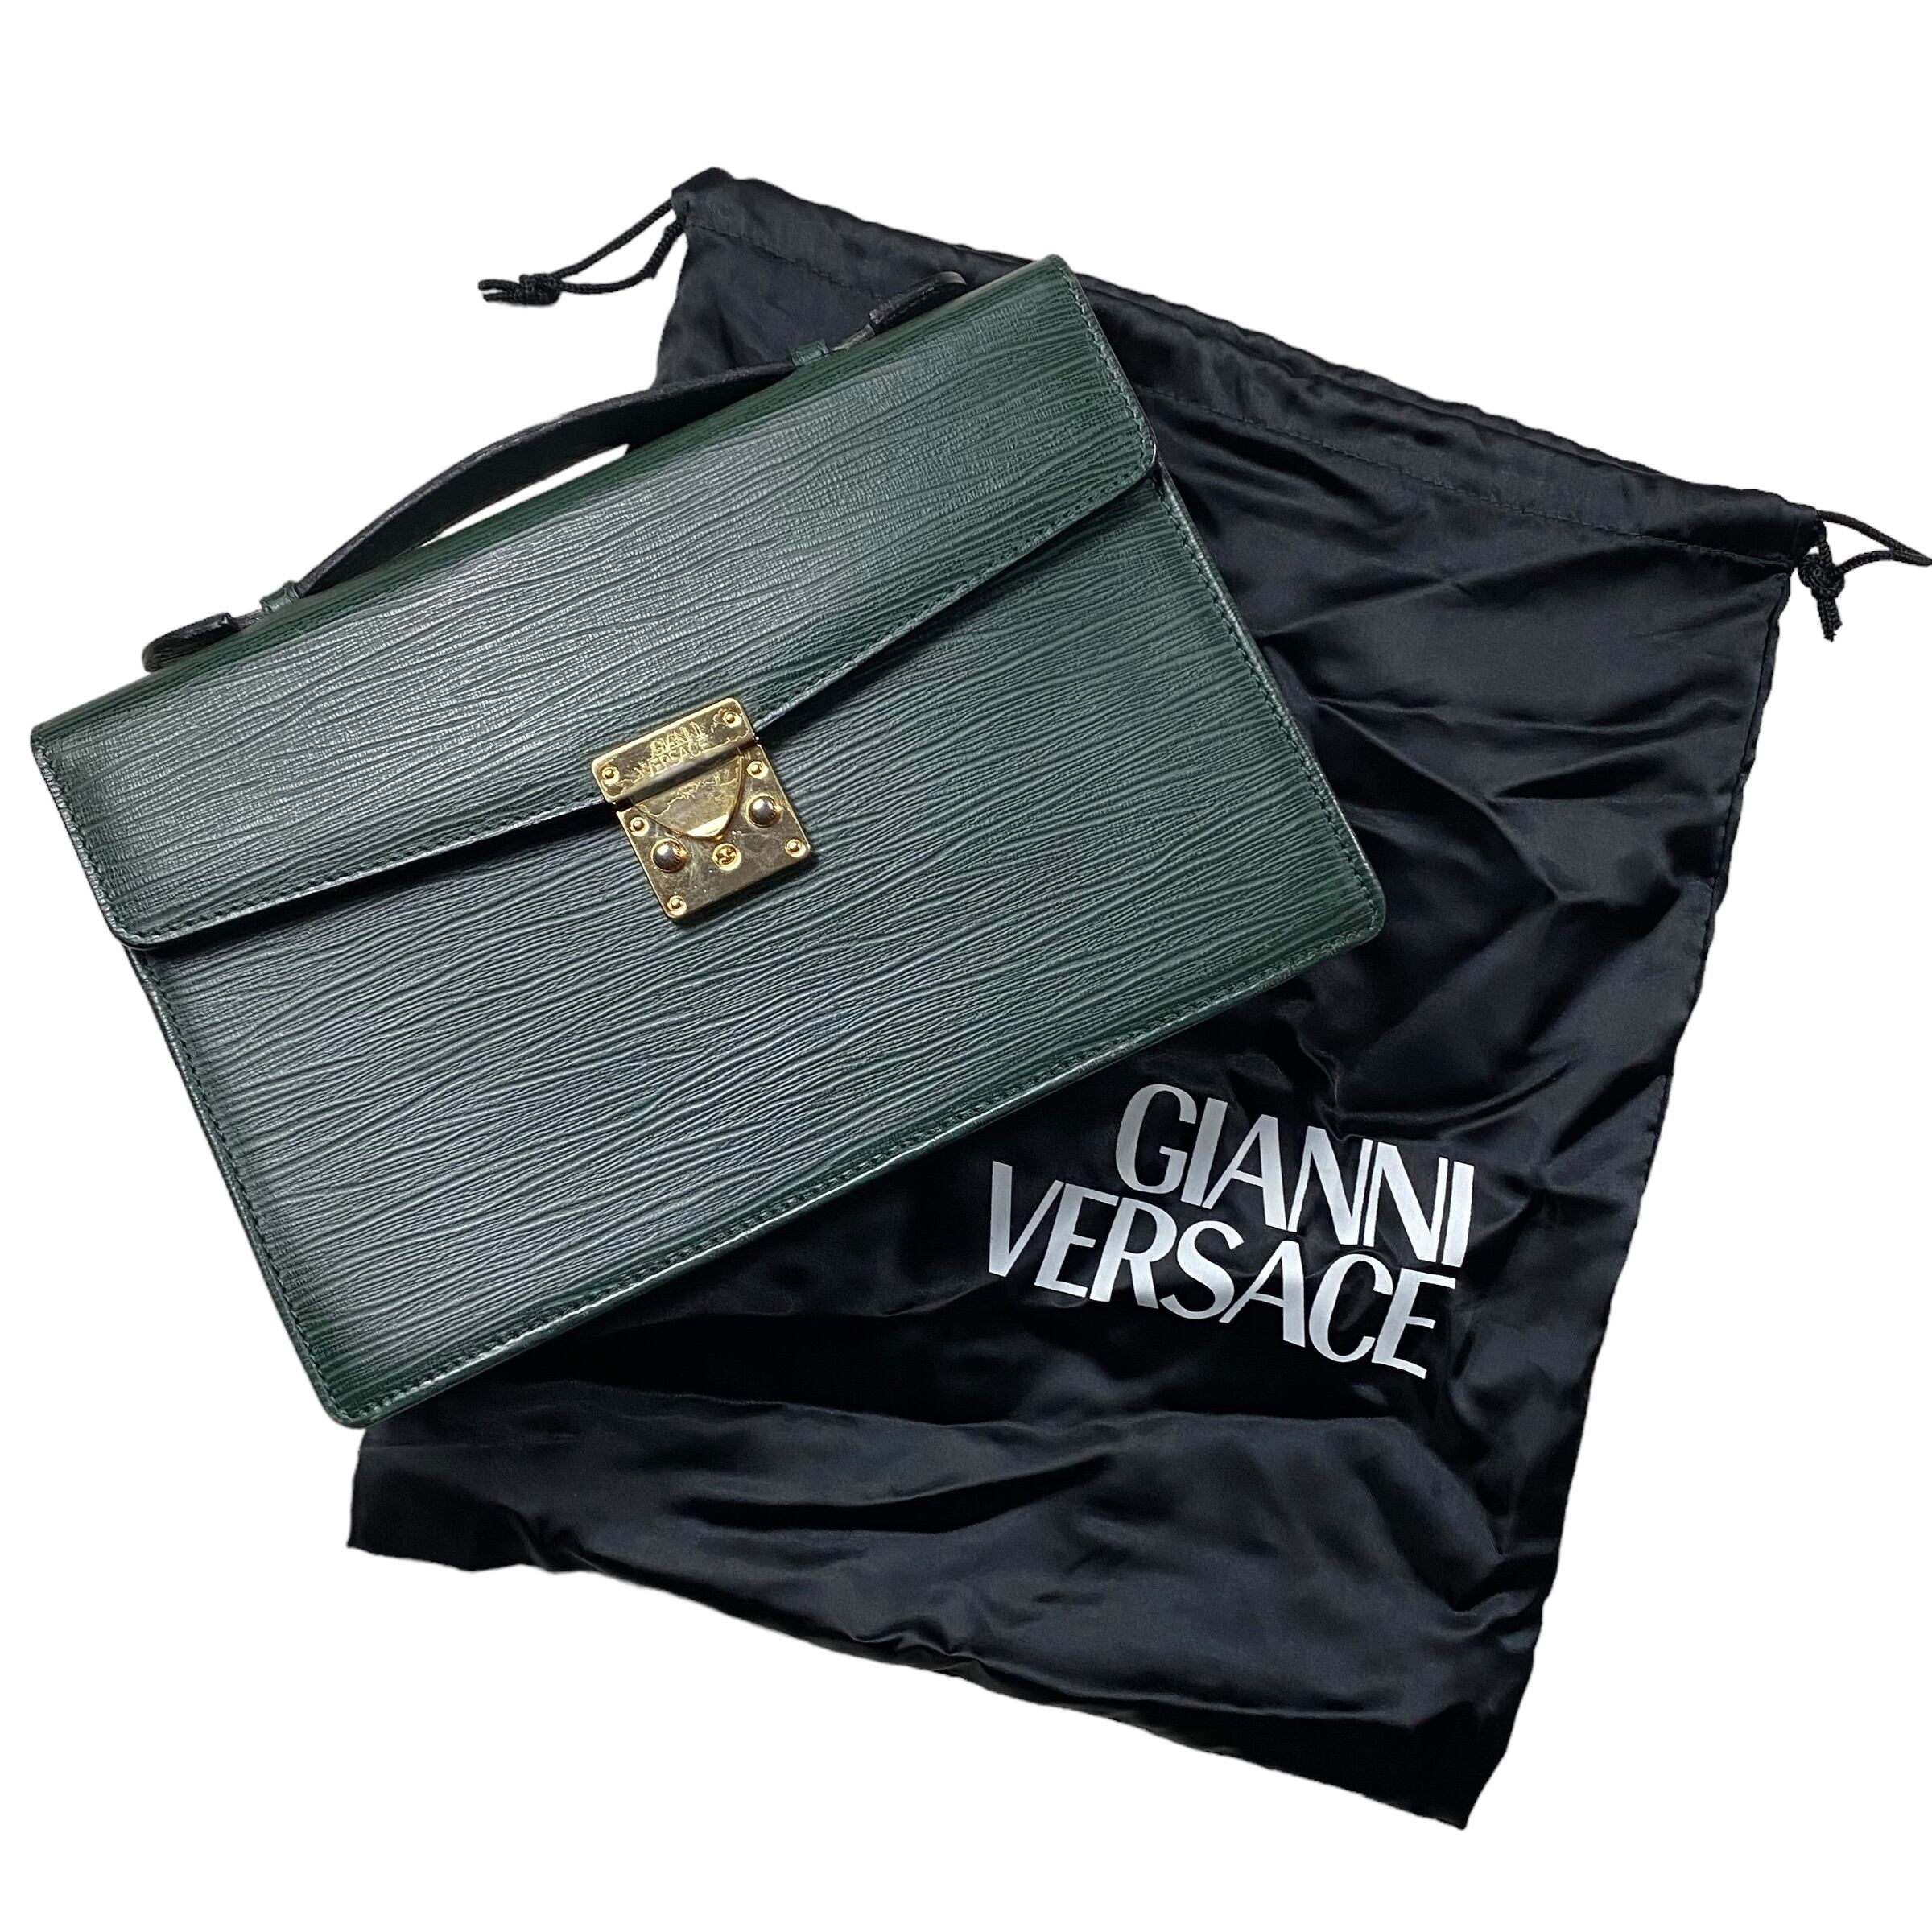 GIANNI VERSACE green leather mini briefcase | NOIR ONLINE powered by BASE